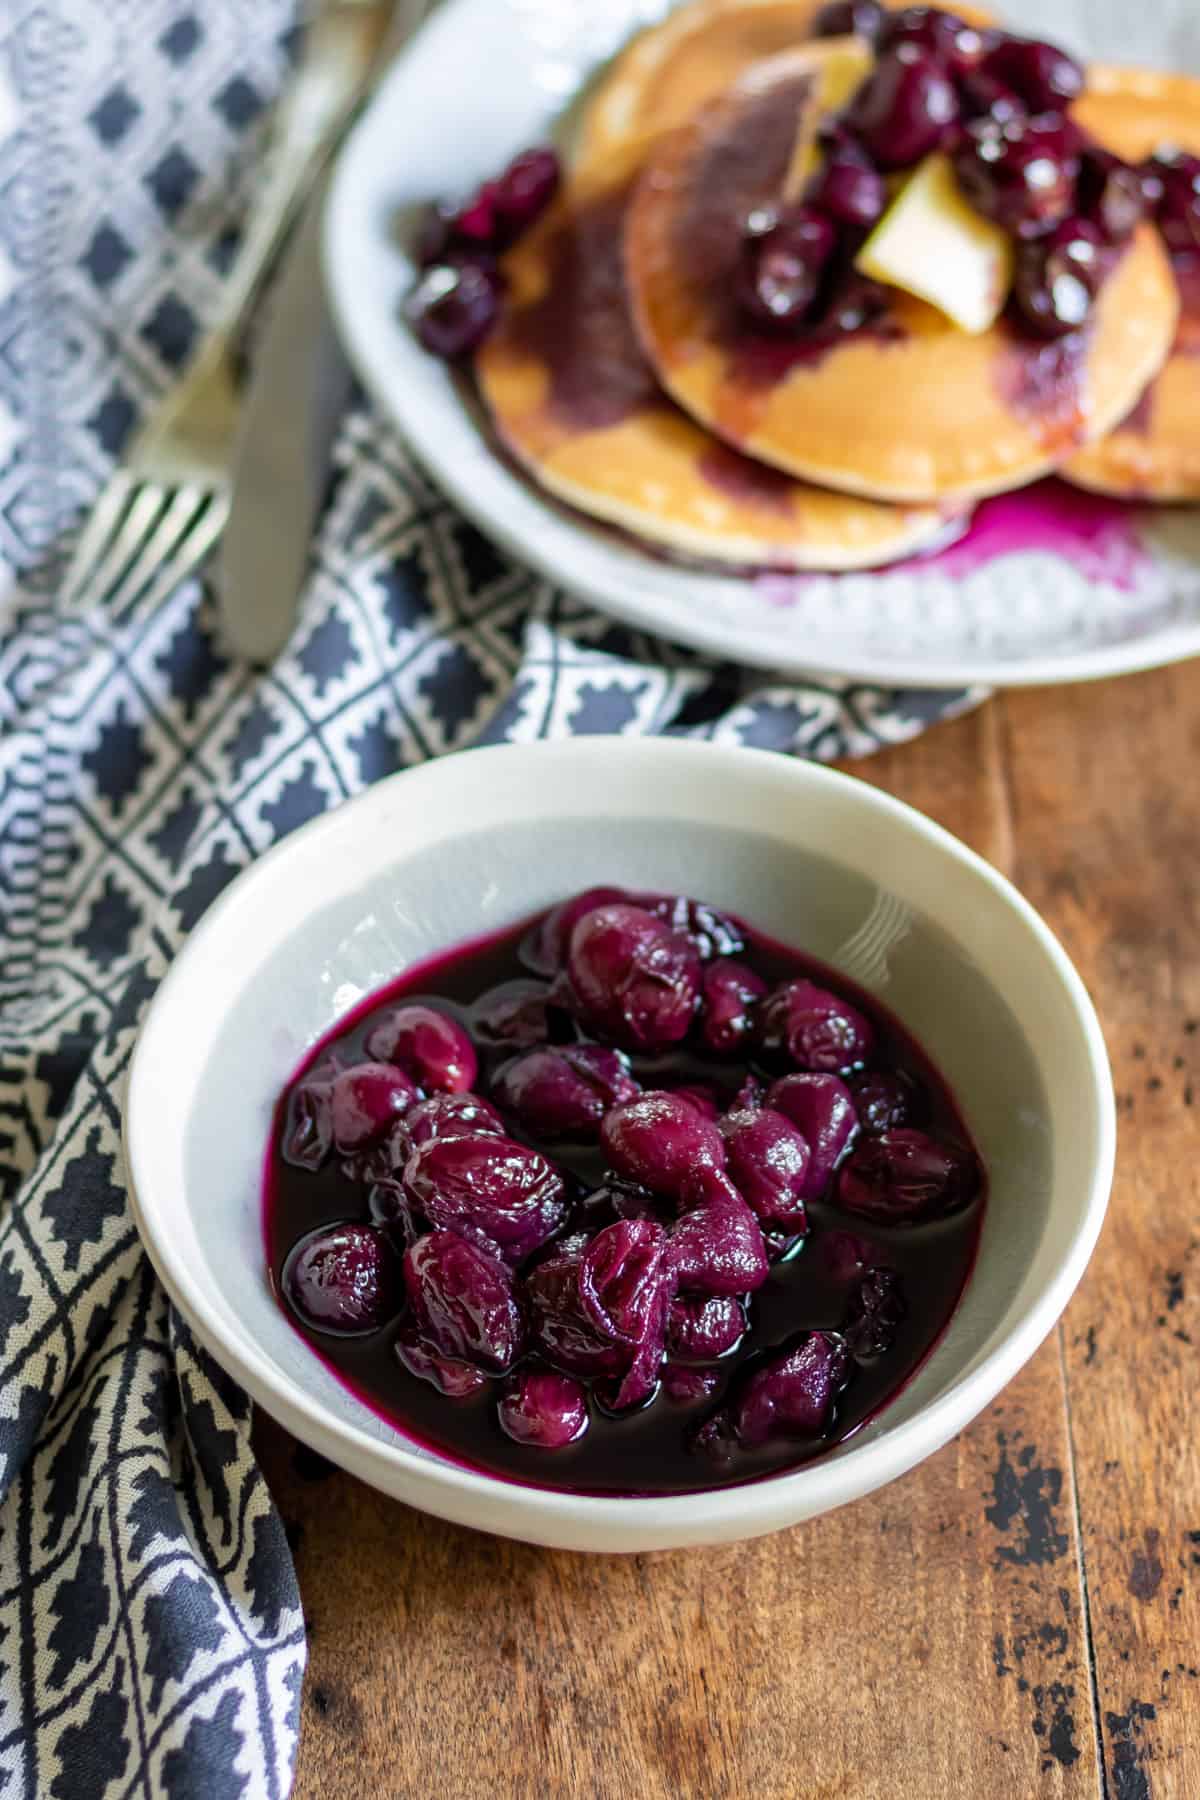 Dish of grape compote on a table with a stack of pancakes.